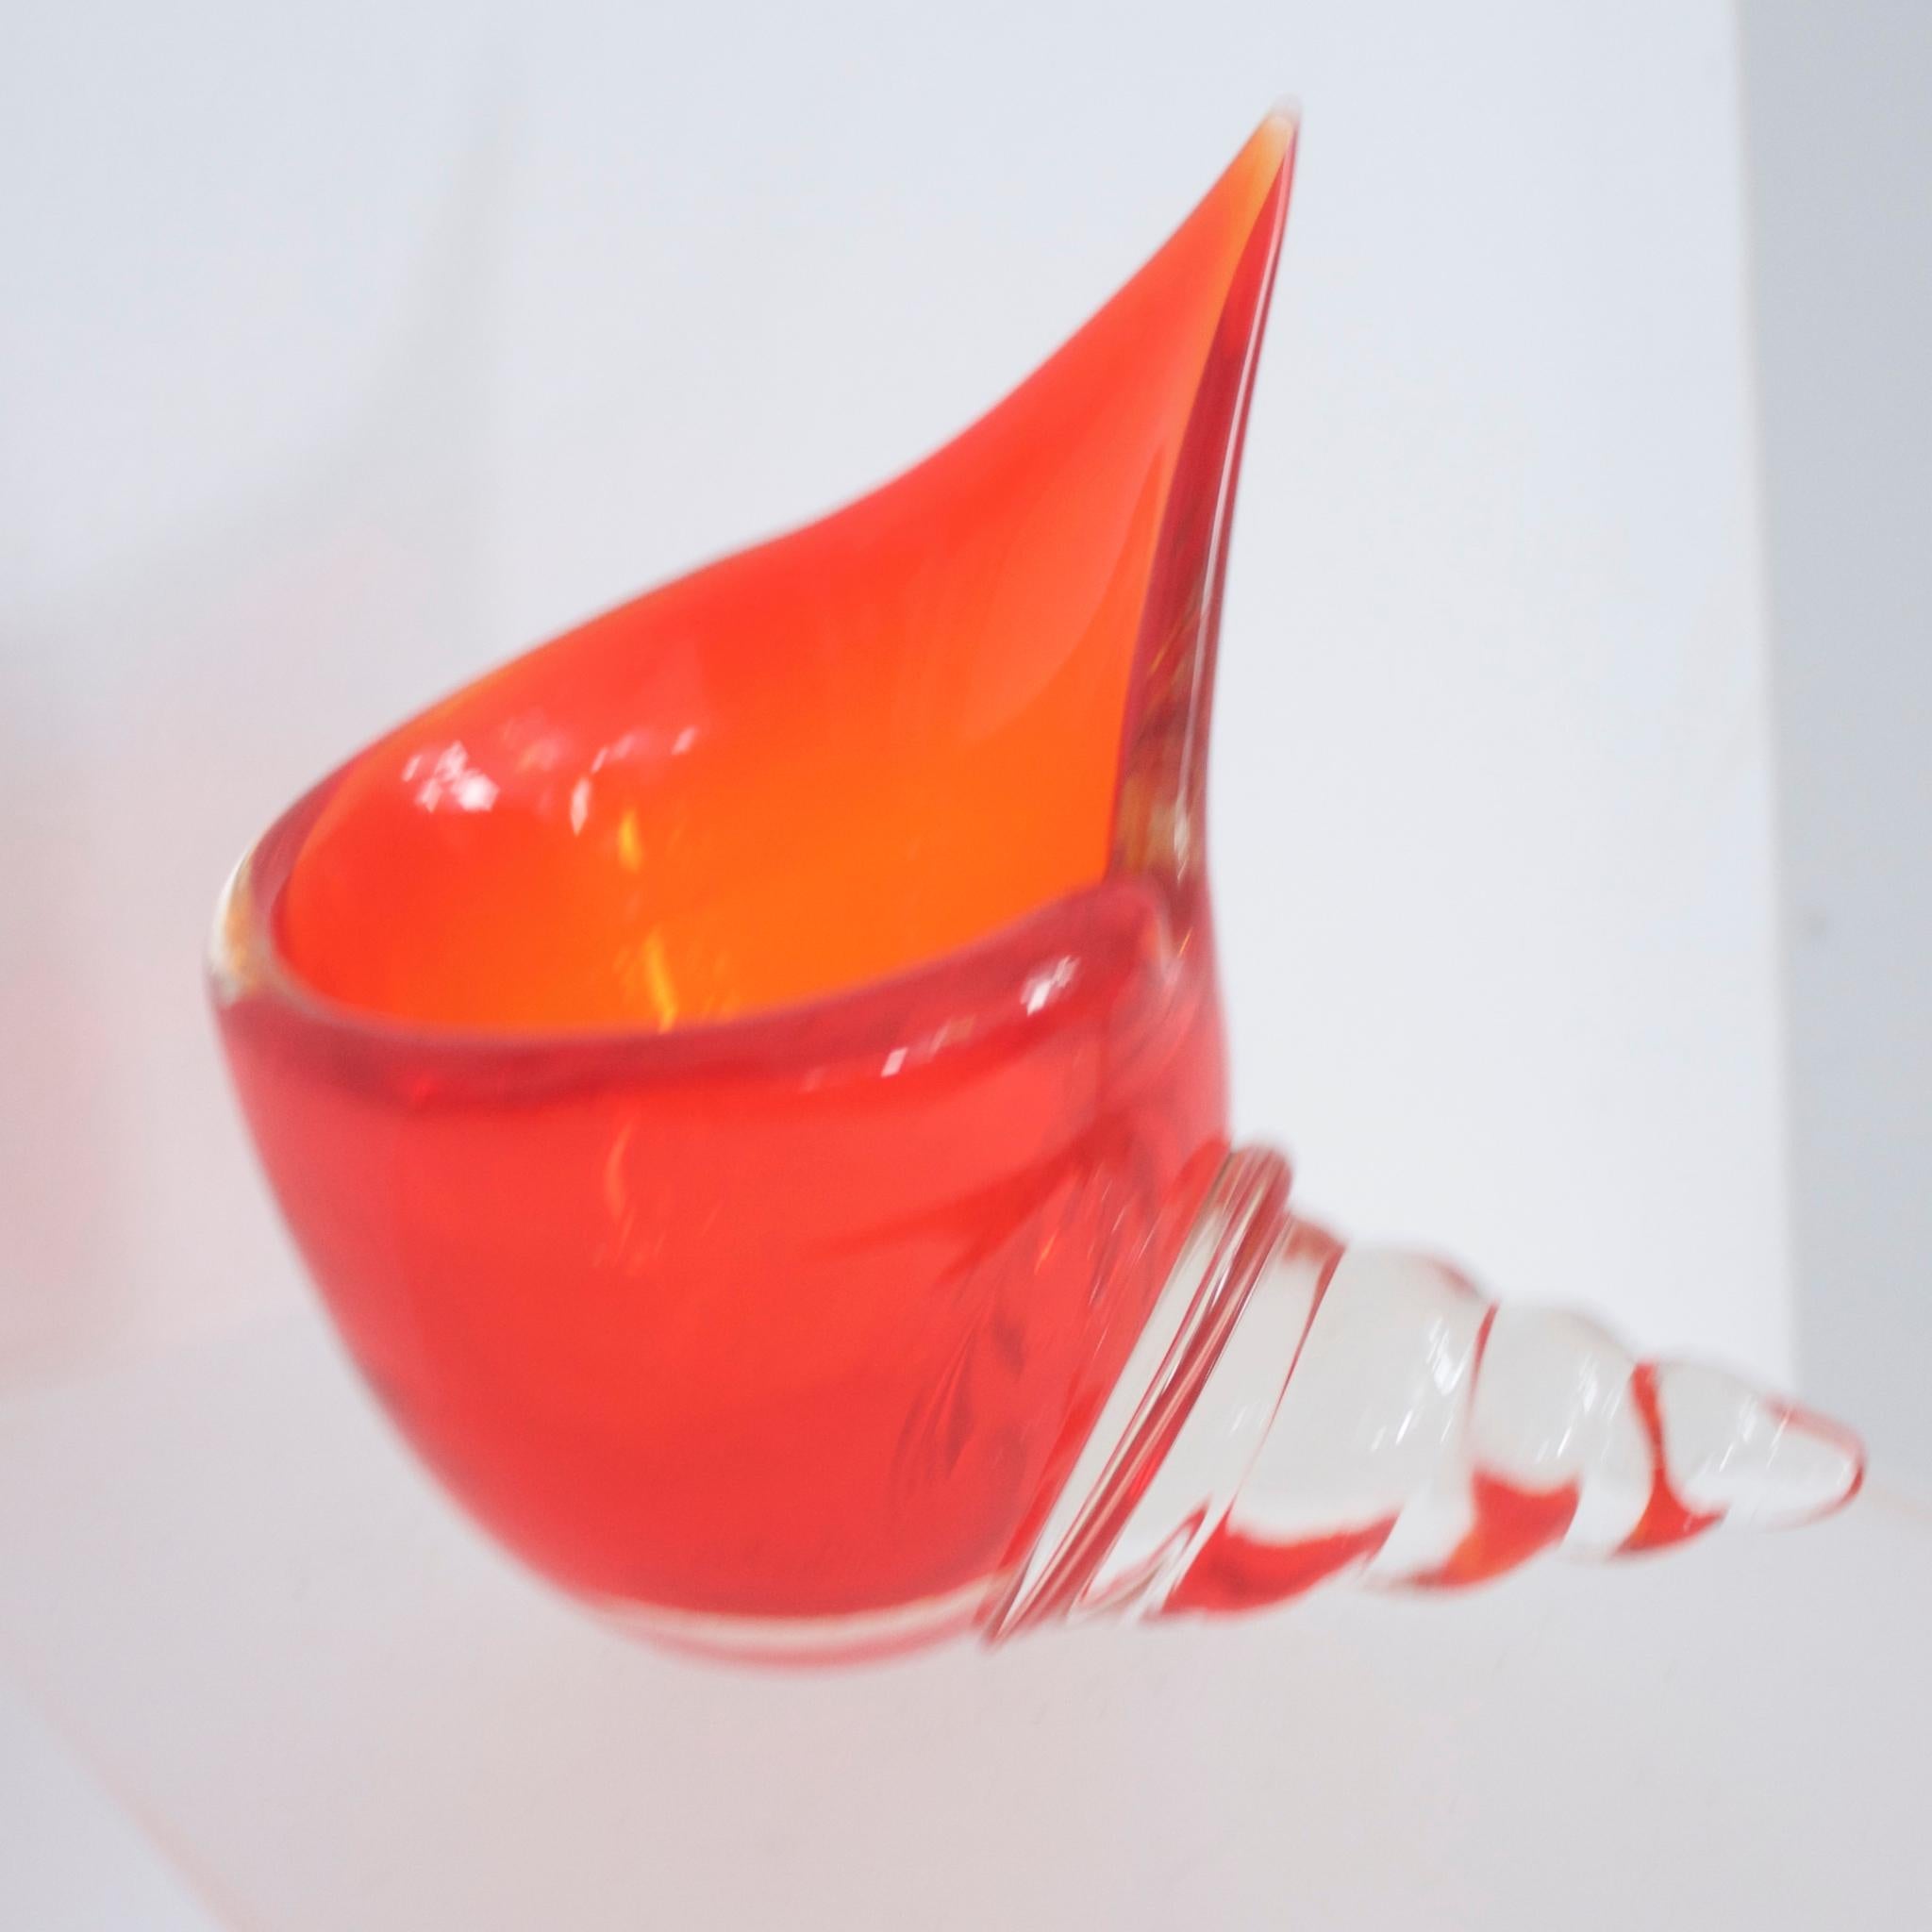 Large Murano conch shell in the style of Barbini. Alfredo Barbini, a glass artist born in 1912 on the islands of Murano in the lagoon of Venice, Italy, was one of Murano's leading figures of the 20th century. His parents were members of families